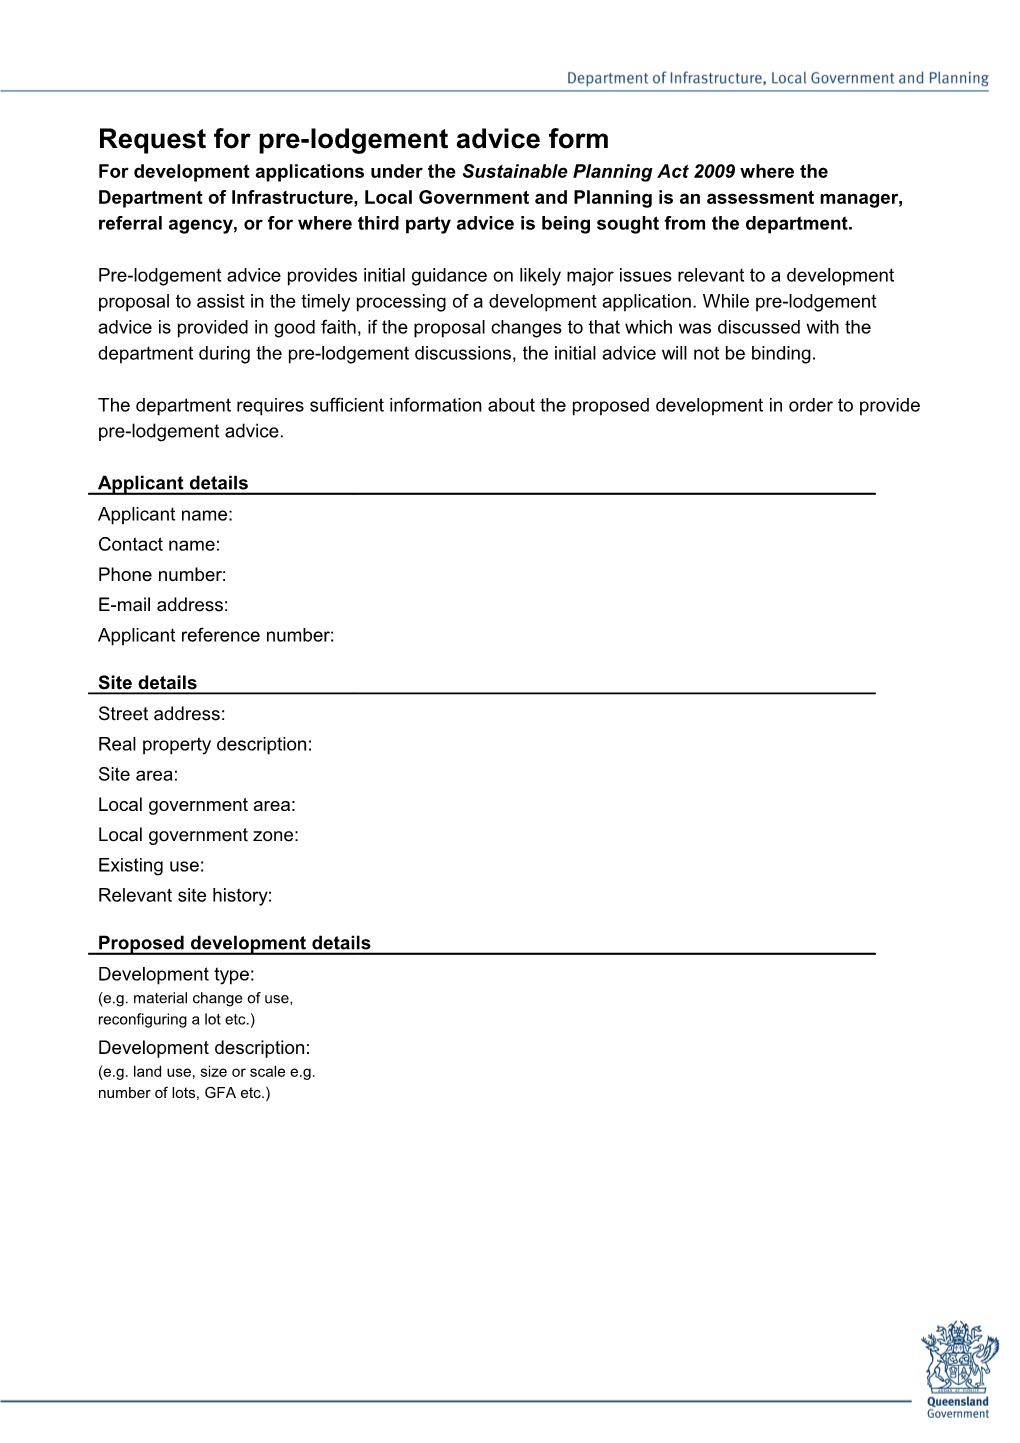 Request for Pre-Lodgement Advice Form